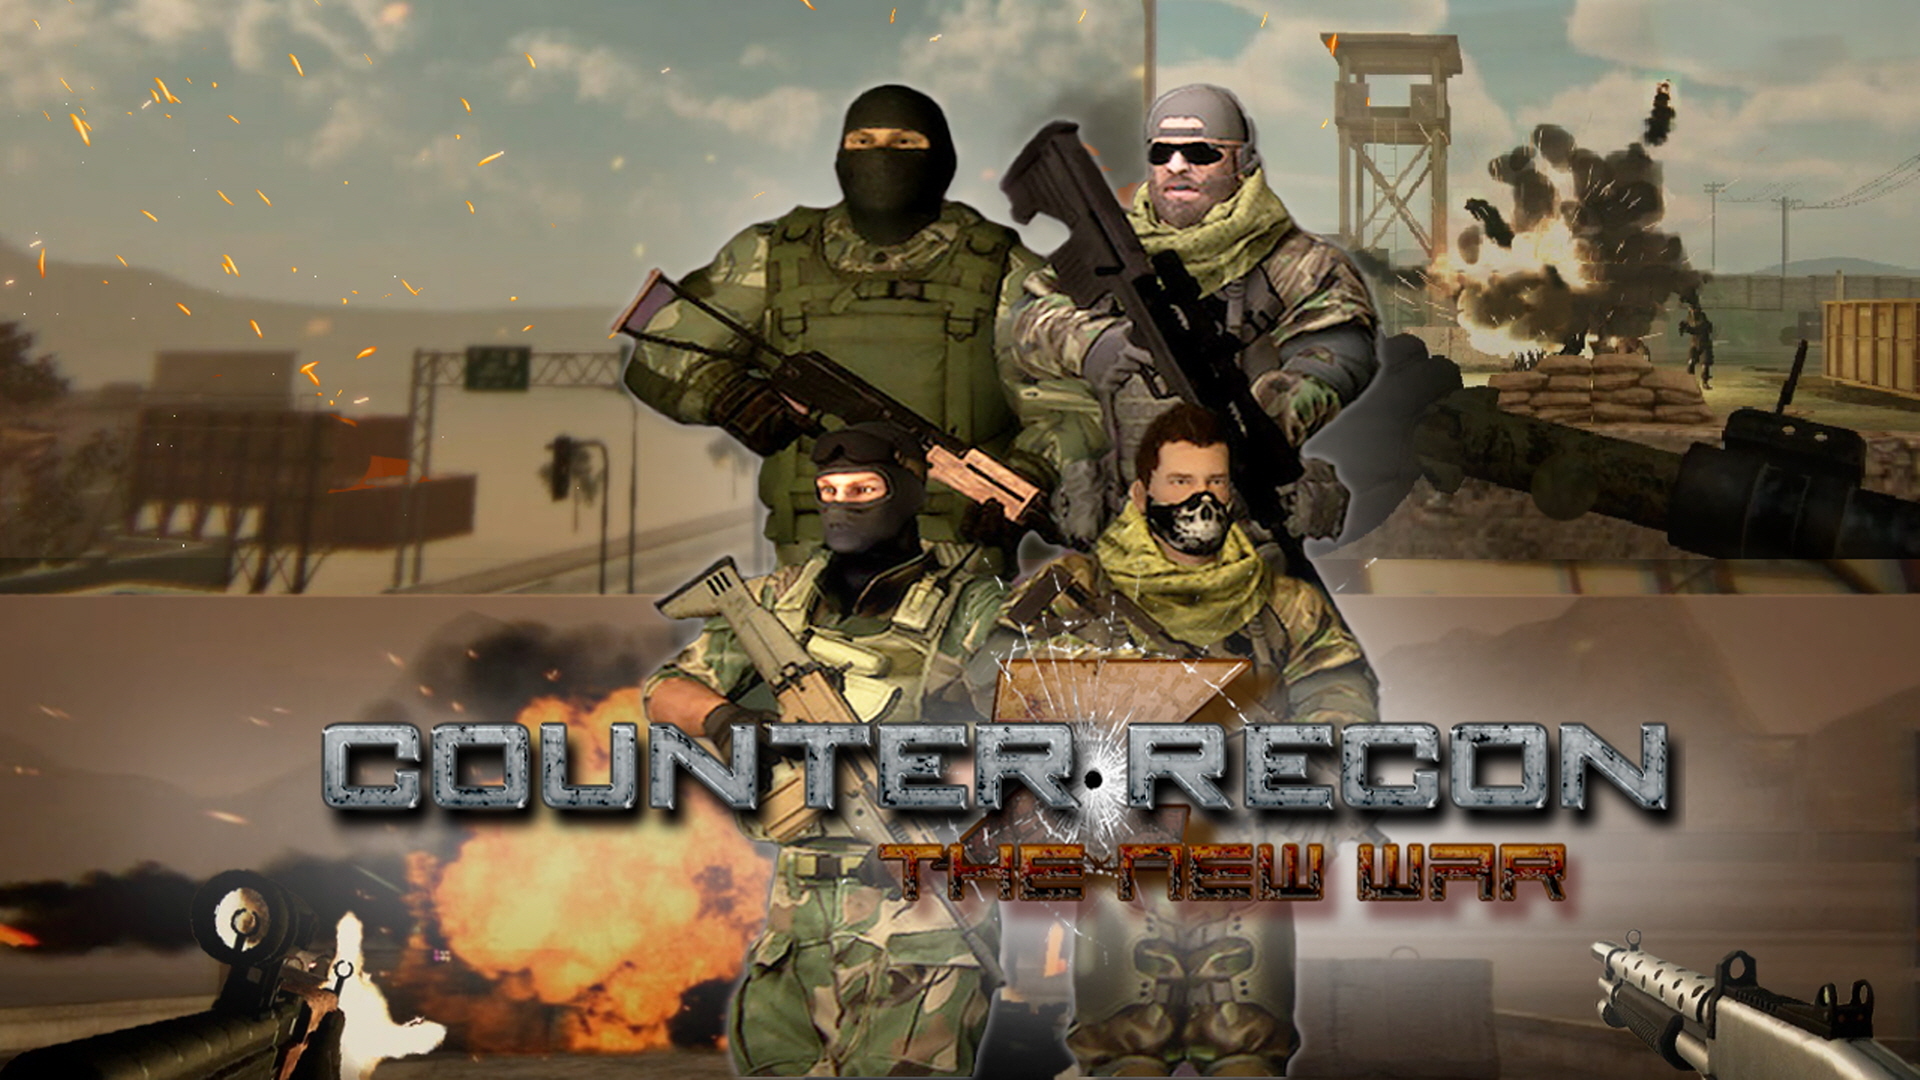 Counter Recon 2: The New War